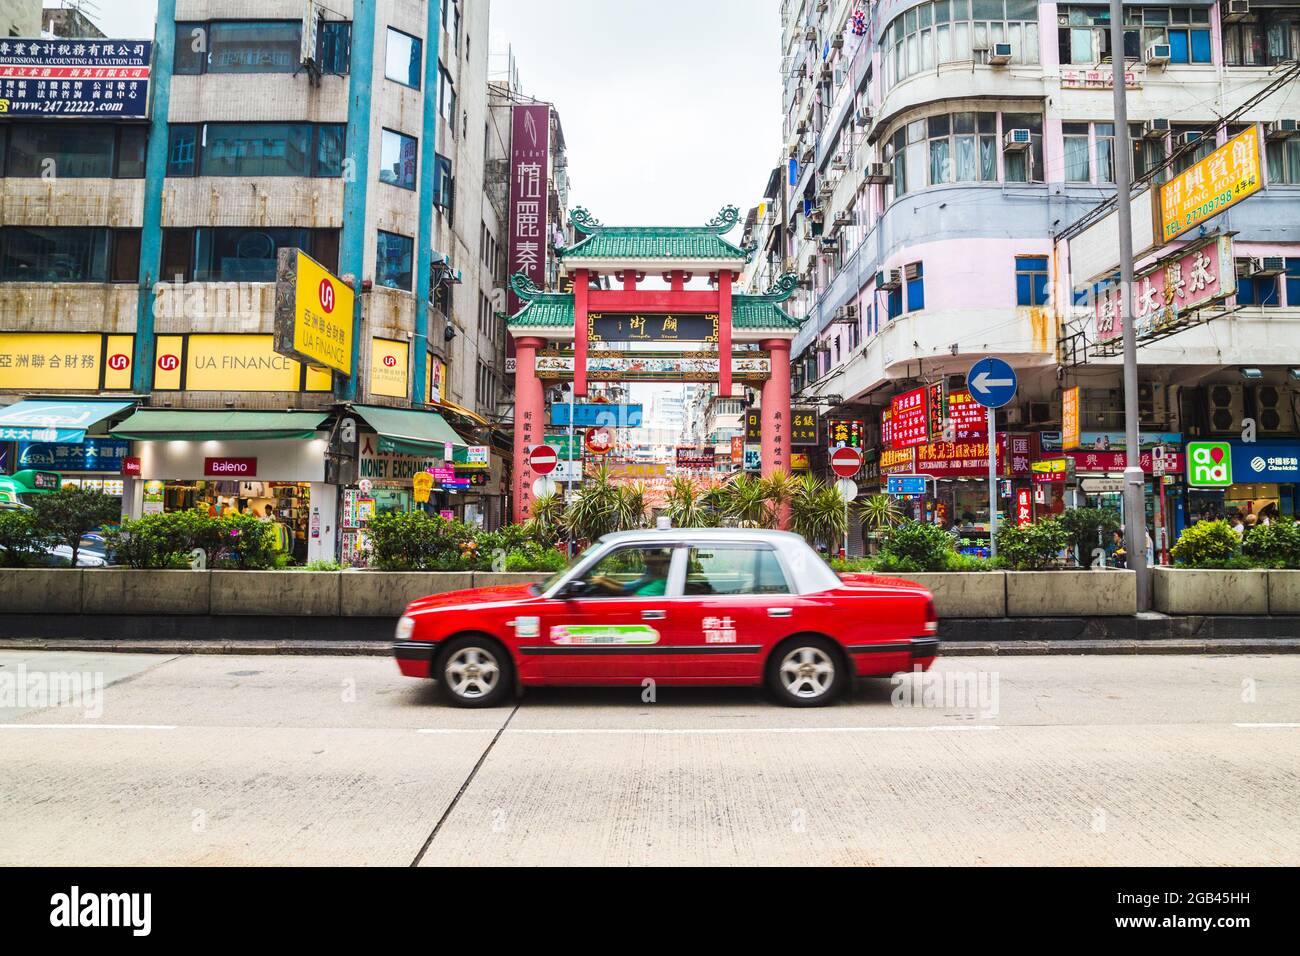 HONG KONG - 11TH APRIL 2017: Streets in Hong Kong showing buildings, shops and a taxi. People can also be seen. Stock Photo